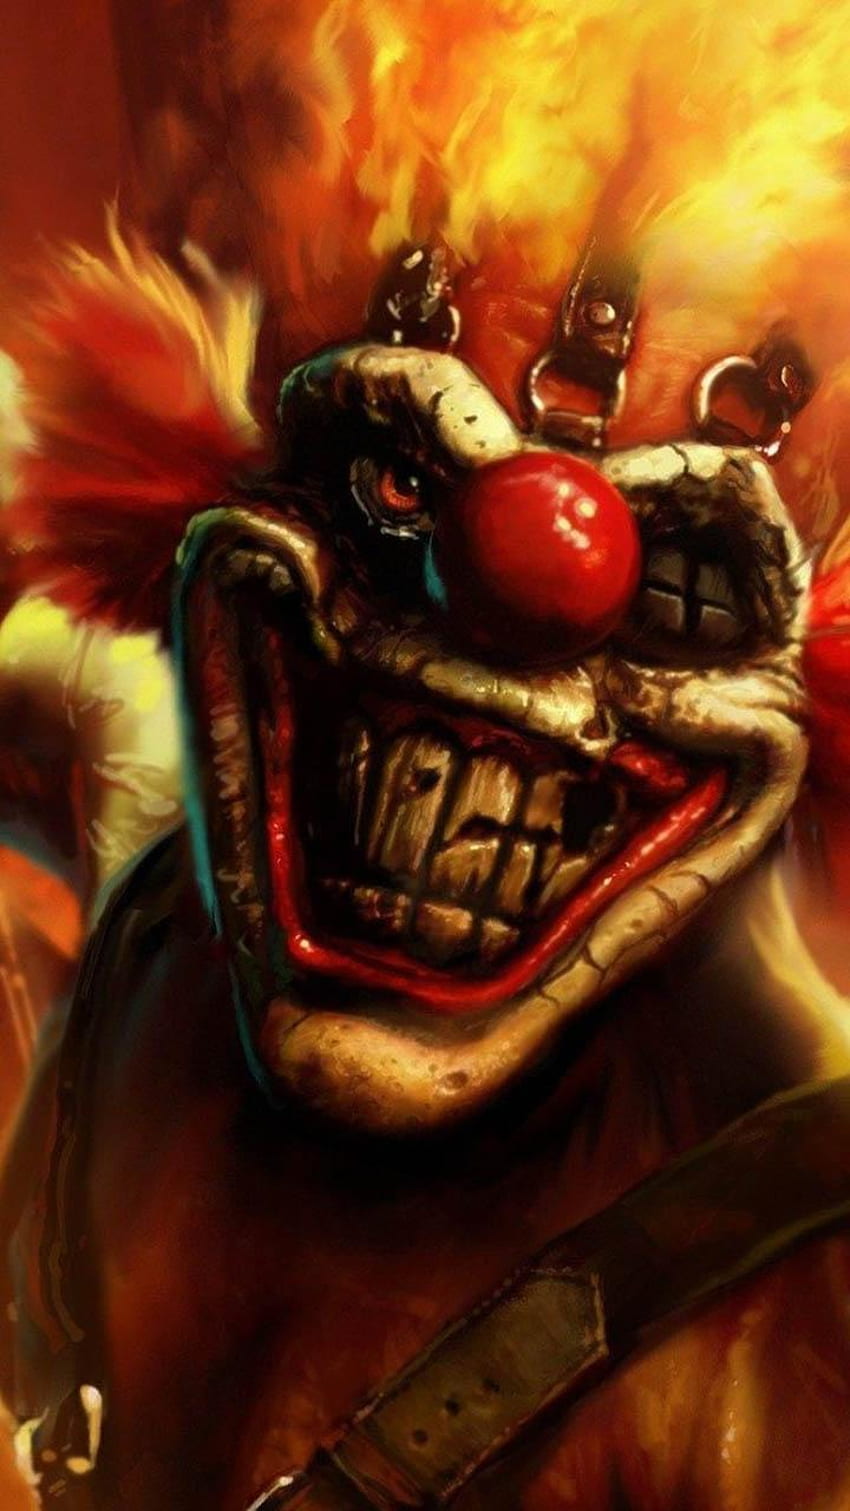 Killer Clown for Android, Crazy Clown HD phone wallpaper